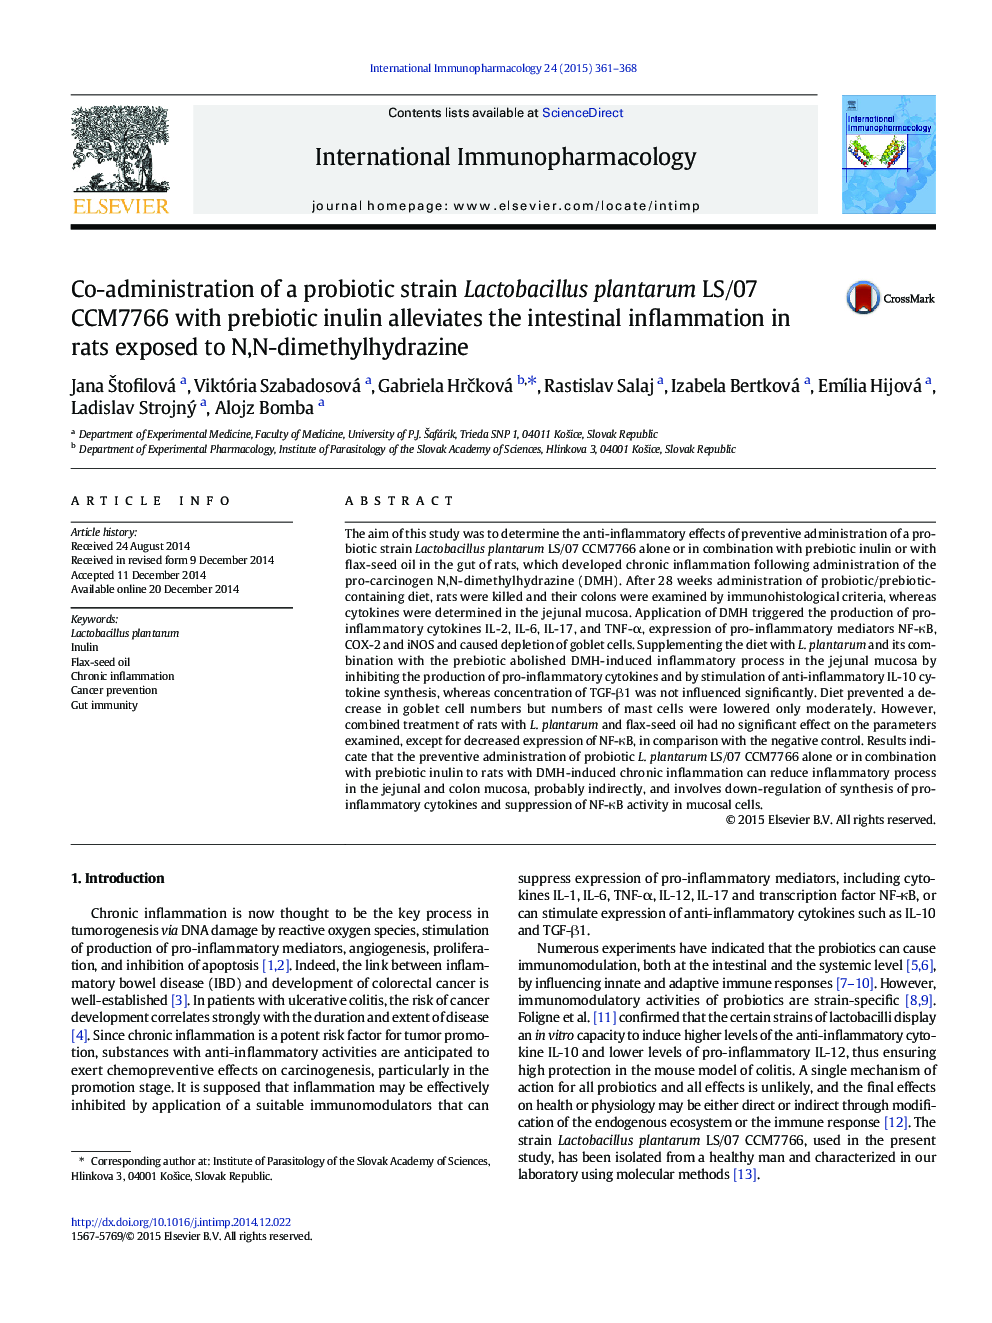 Co-administration of a probiotic strain Lactobacillus plantarum LS/07 CCM7766 with prebiotic inulin alleviates the intestinal inflammation in rats exposed to N,N-dimethylhydrazine